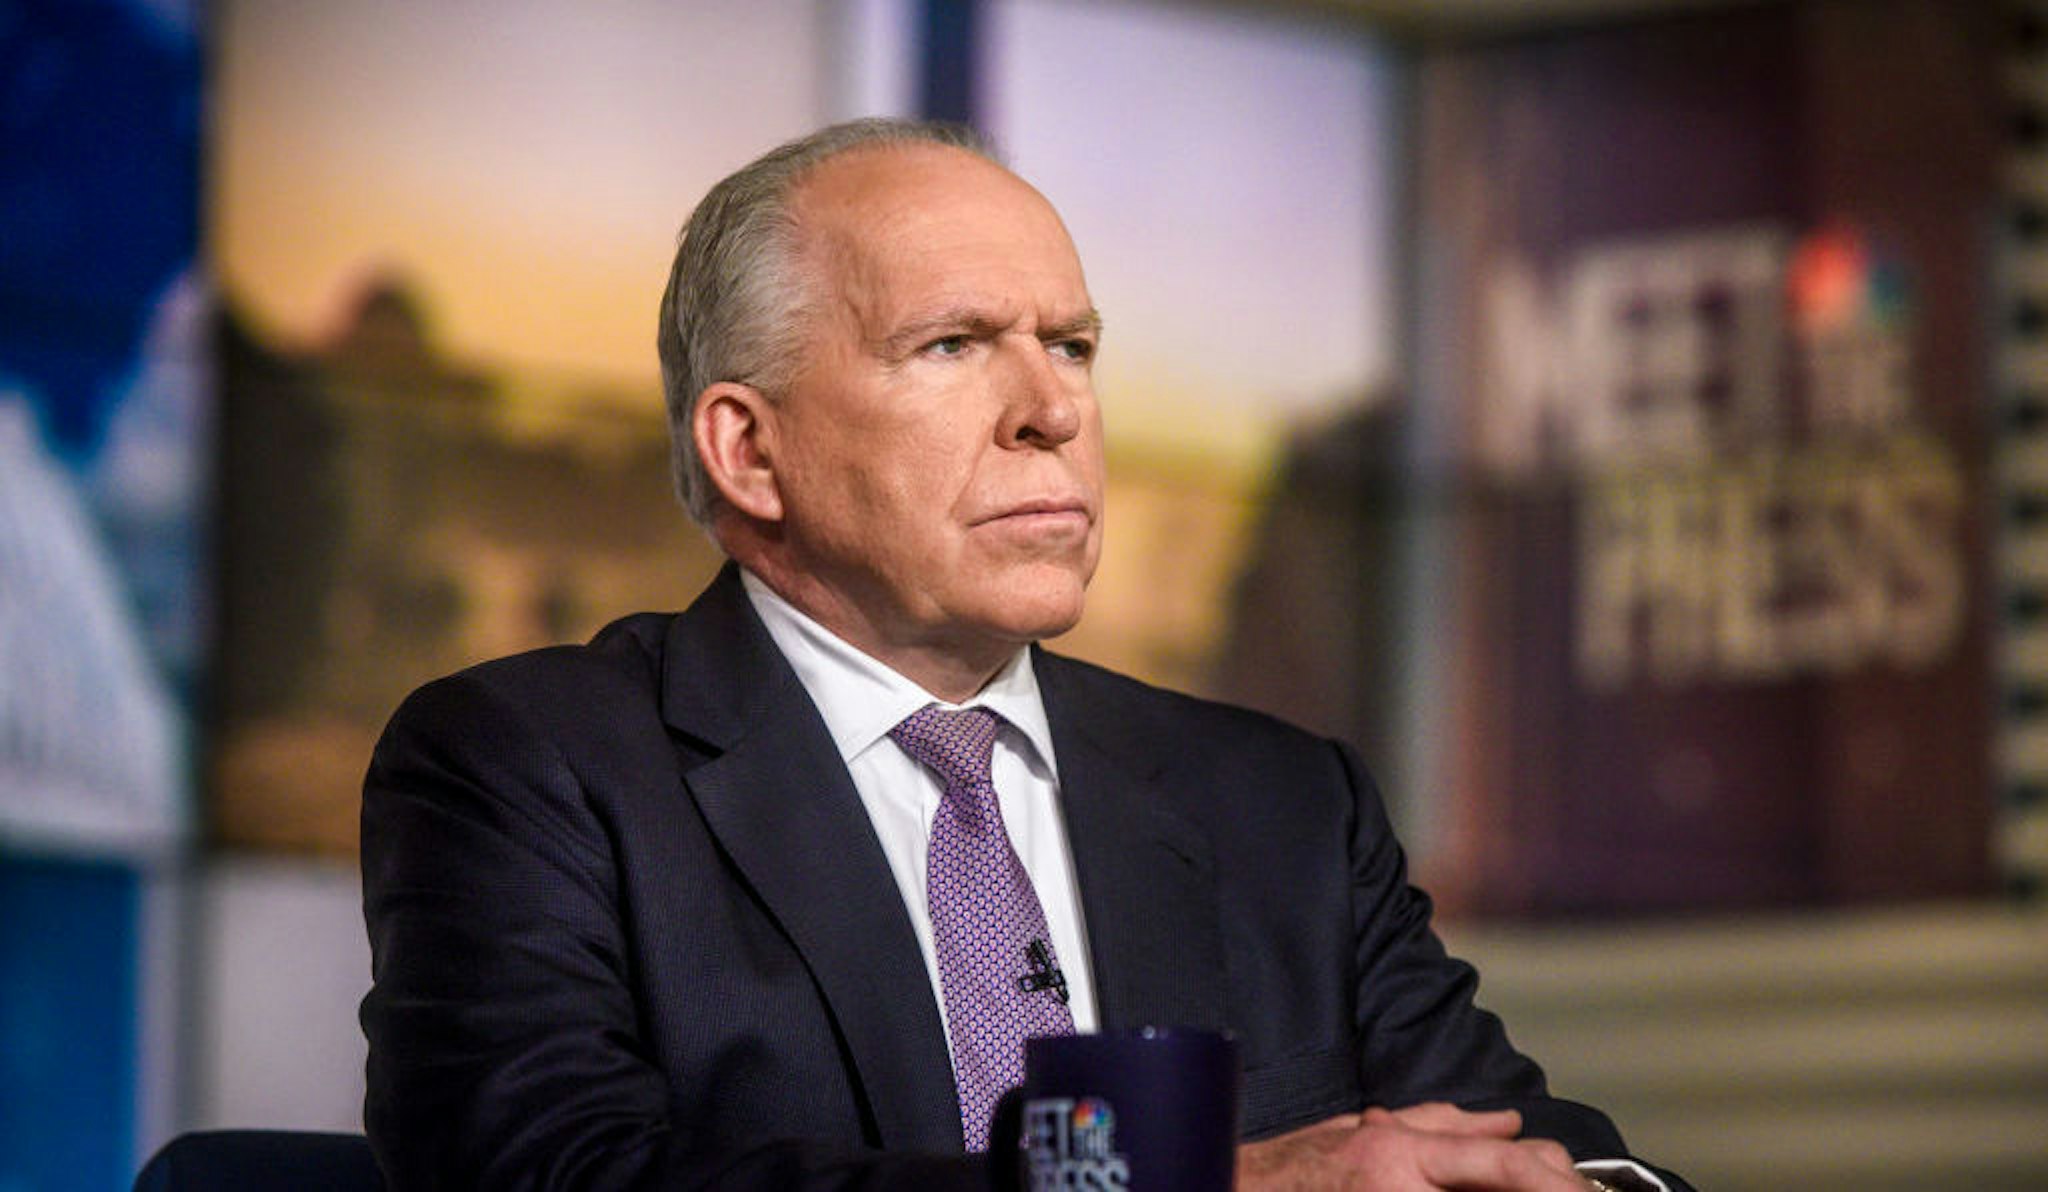 John Brennan, Former CIA Director; NBC News Senior National Security and Intelligence Analyst, appears on "Meet the Press" in Washington, D.C., Sunday, April 15, 2018. (Photo by: William B. Plowman/NBC/NBC NewsWire via Getty Images)